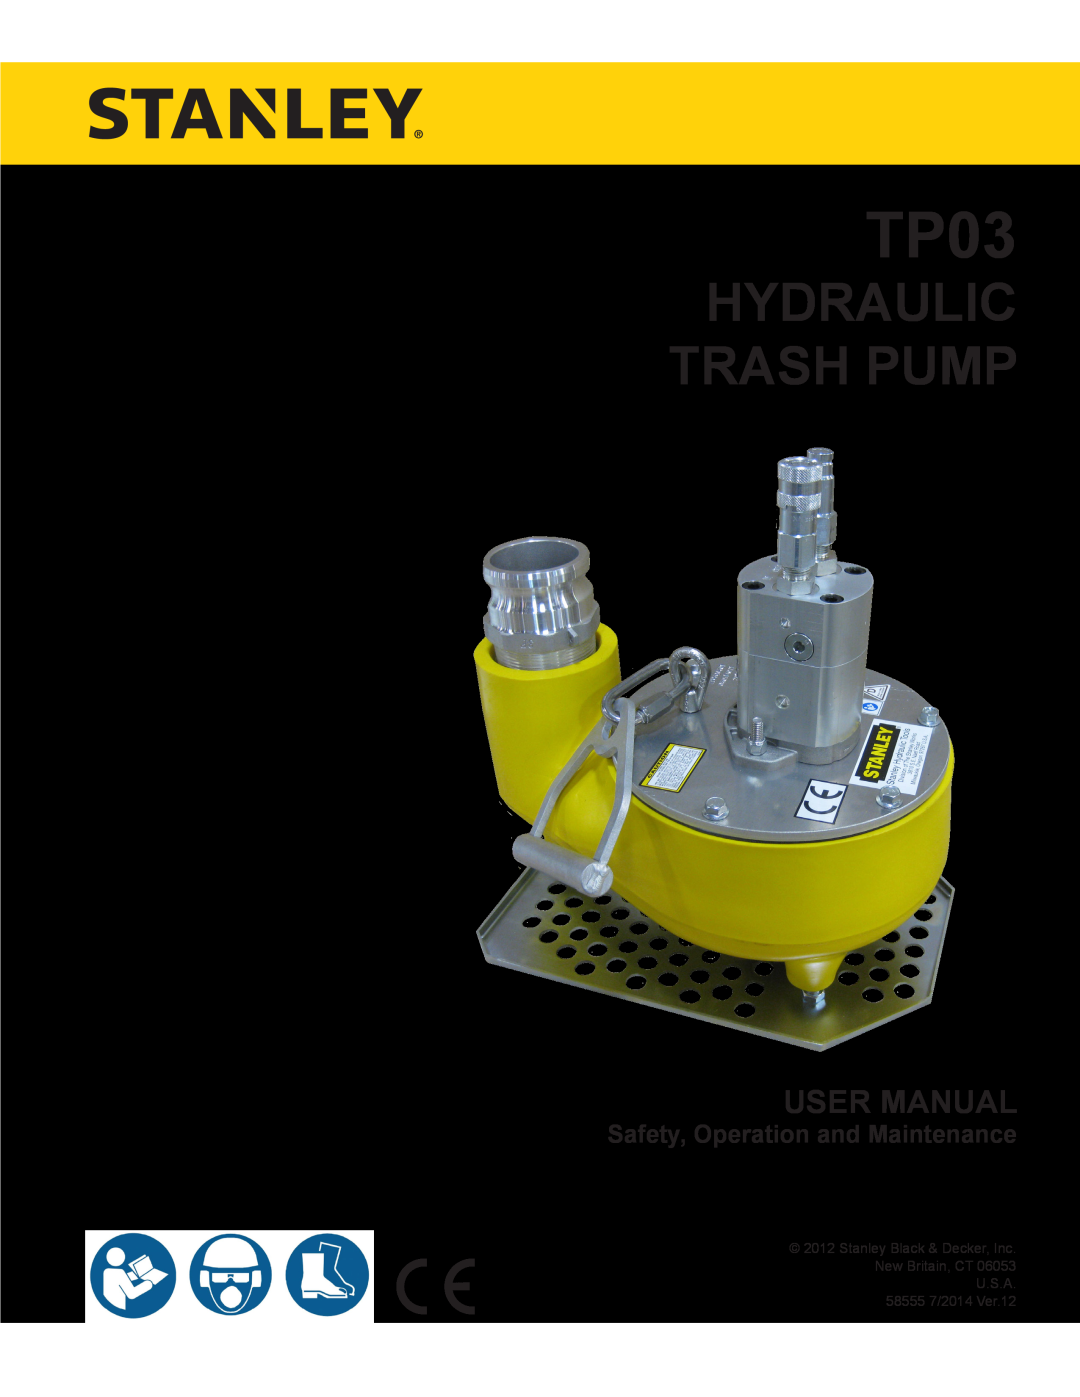 Stanley Black & Decker TP03 user manual Safety, Operation and Maintenance, Hydraulic Trash Pump 